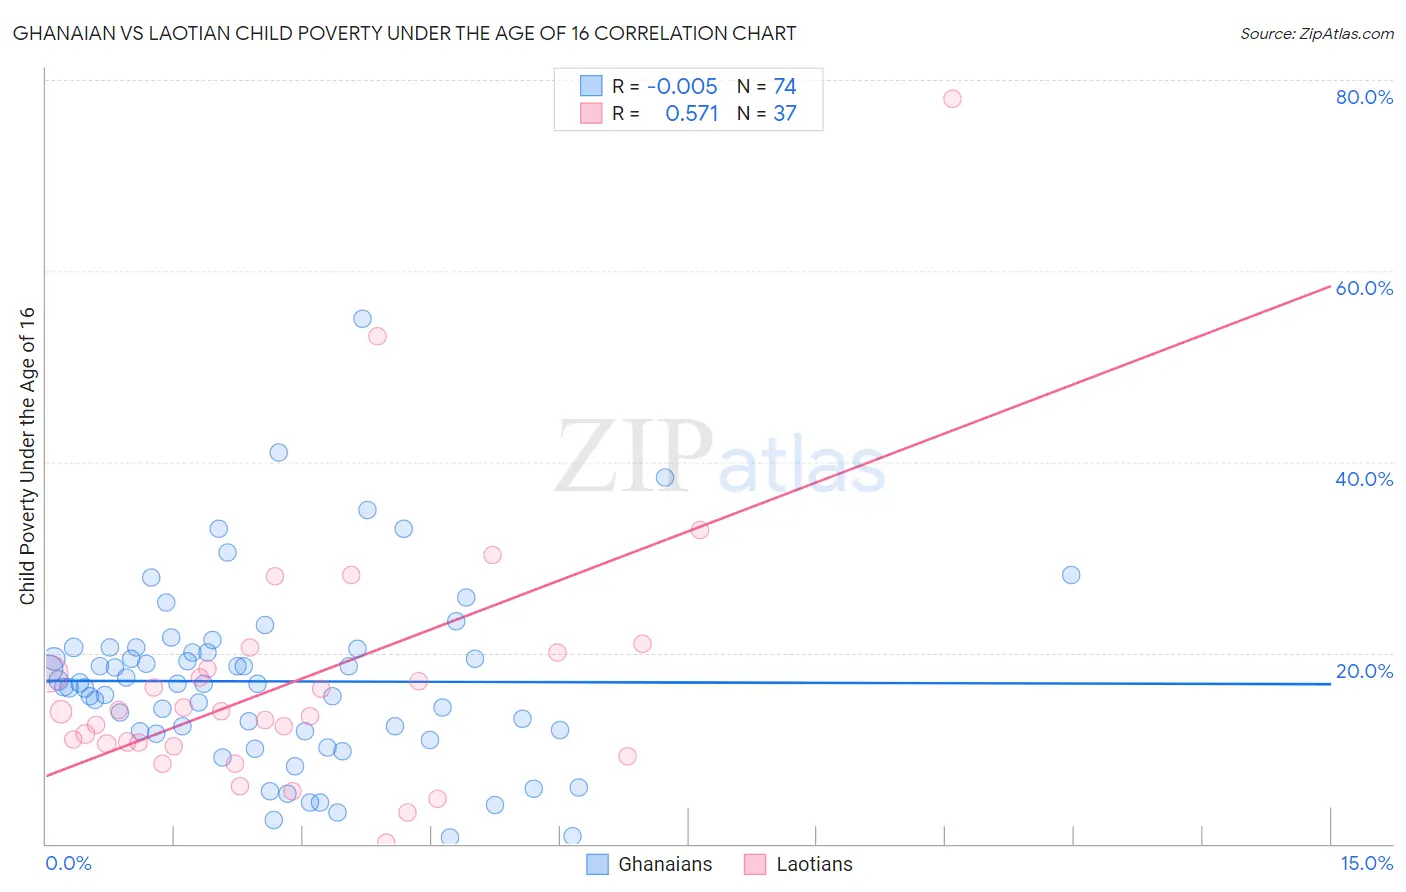 Ghanaian vs Laotian Child Poverty Under the Age of 16